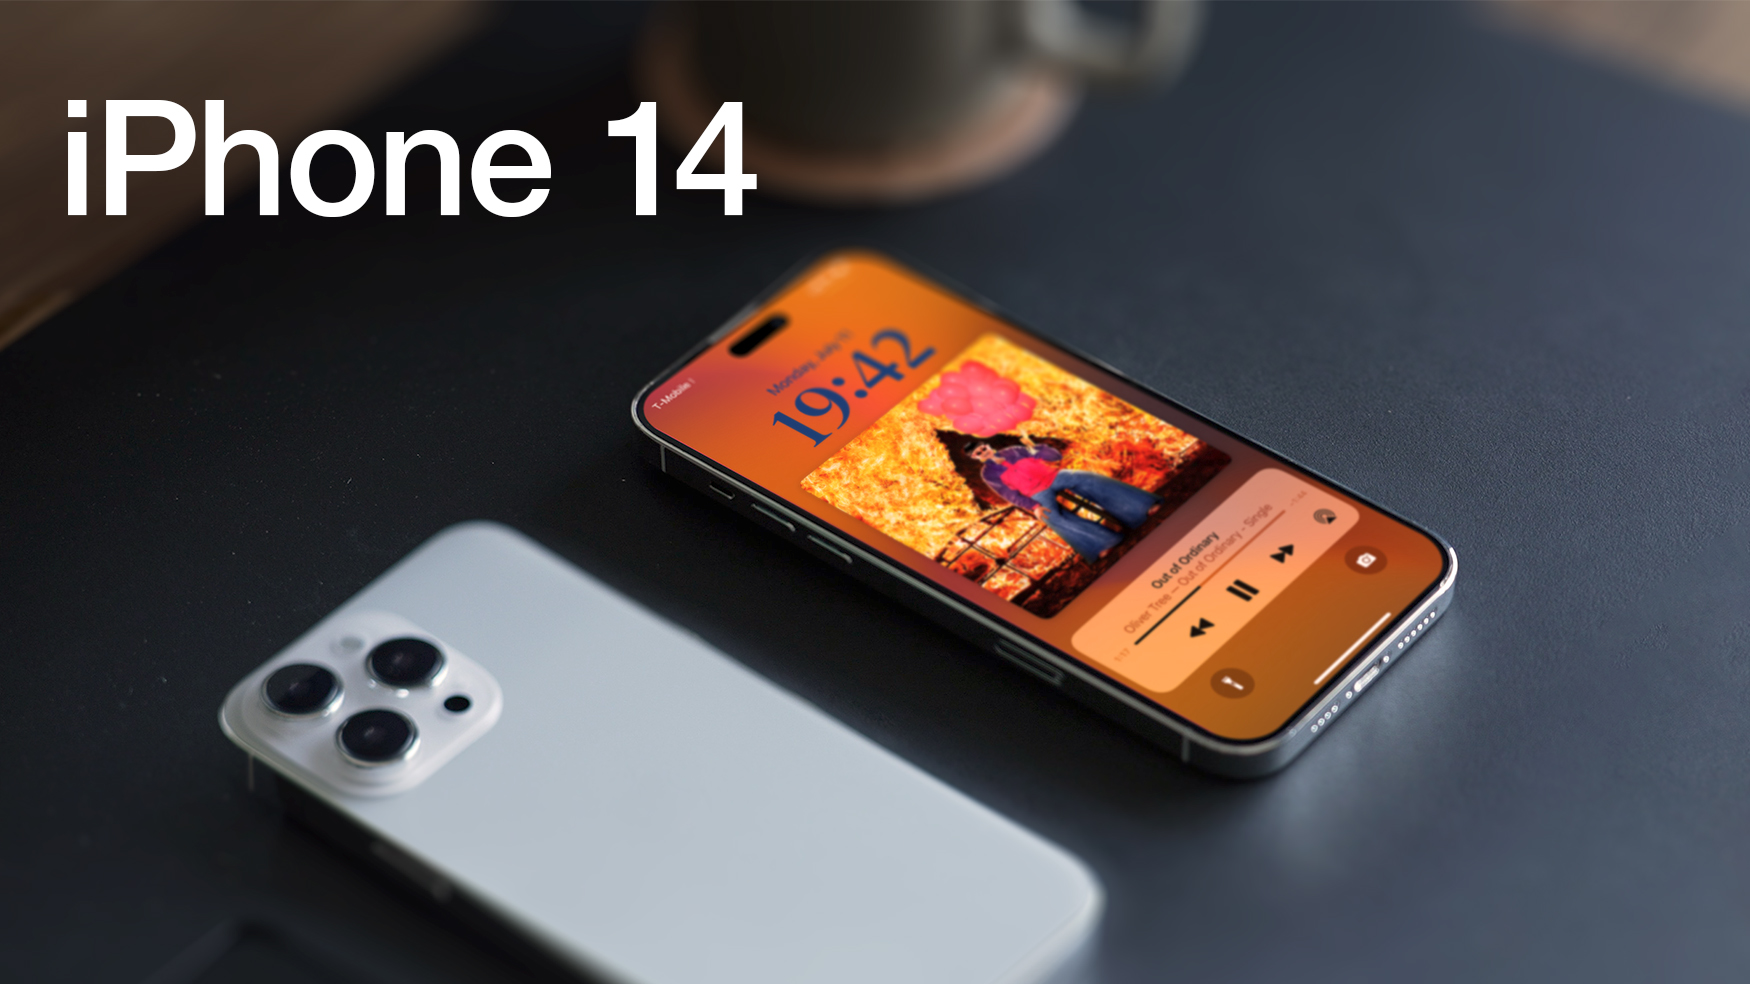 Six Days Left: Recap of All the Latest iPhone 14 and iPhone 14 Pro Rumors